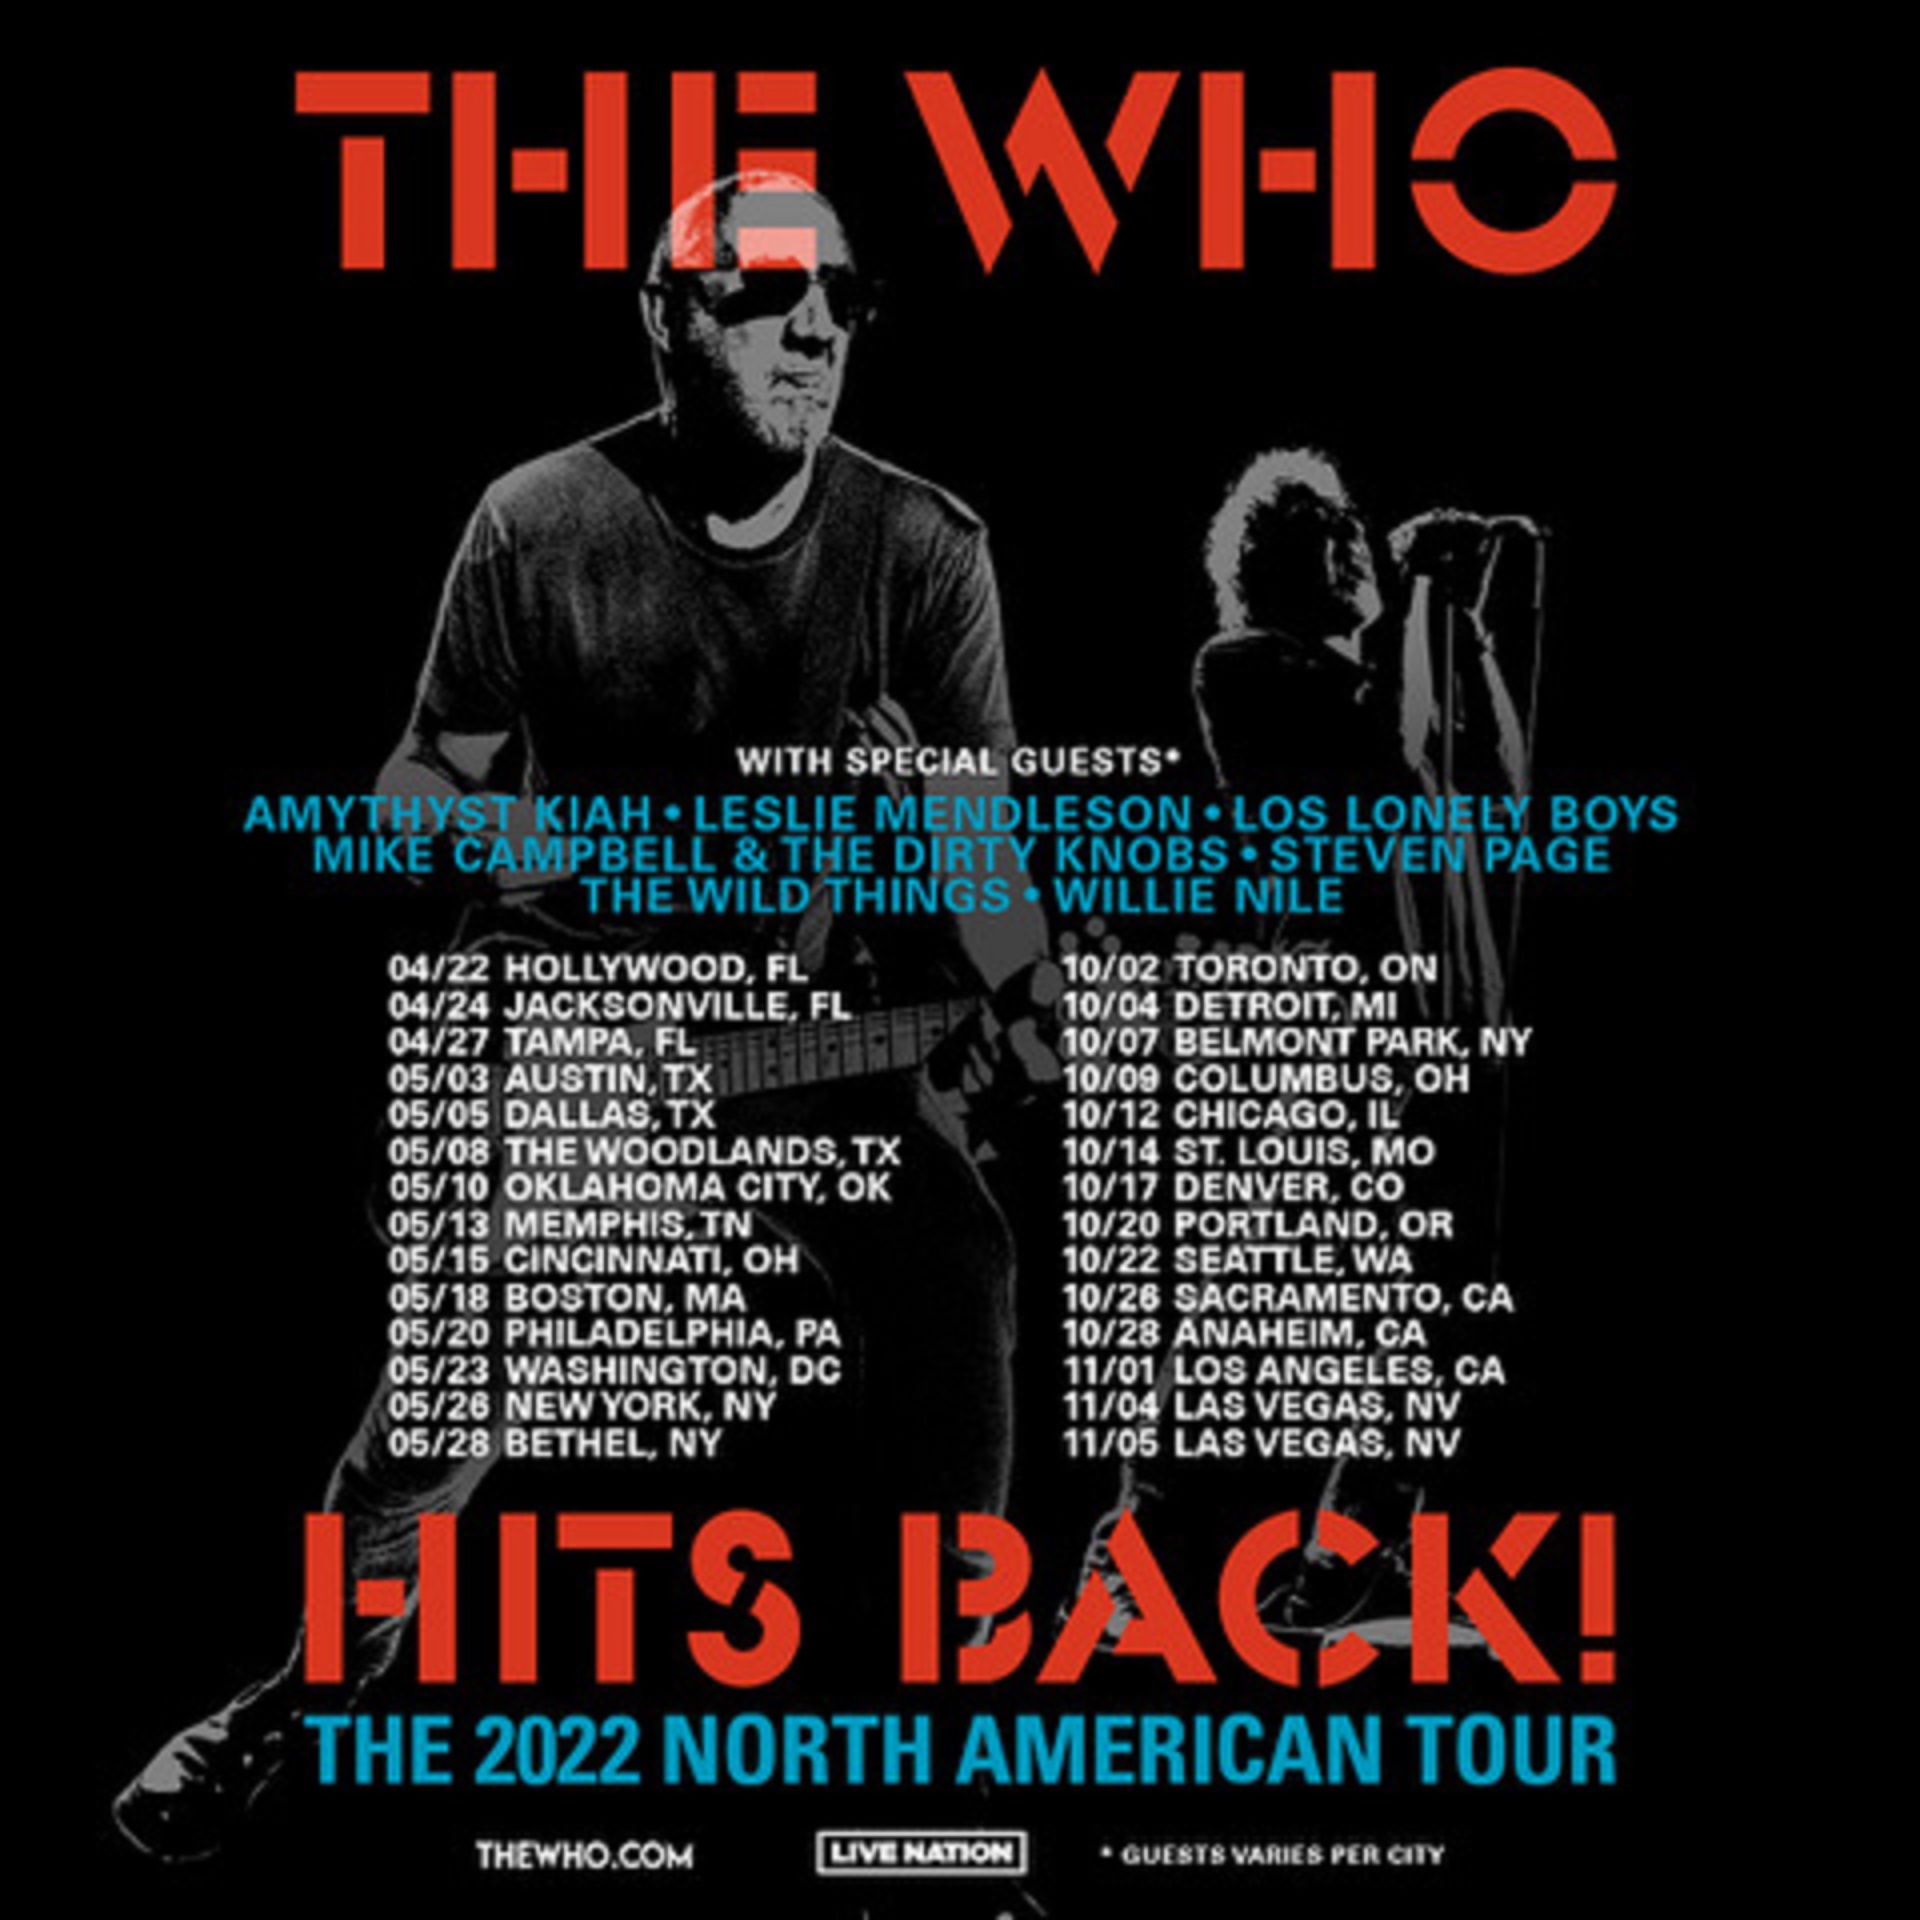 THE WHO ANNOUNCE SPECIAL GUESTS FOR 2022 TOUR: Mike Campbell & The Dirty Knobs, Los Lonely Boys, Amethyst Kiah, The Wild Things + more